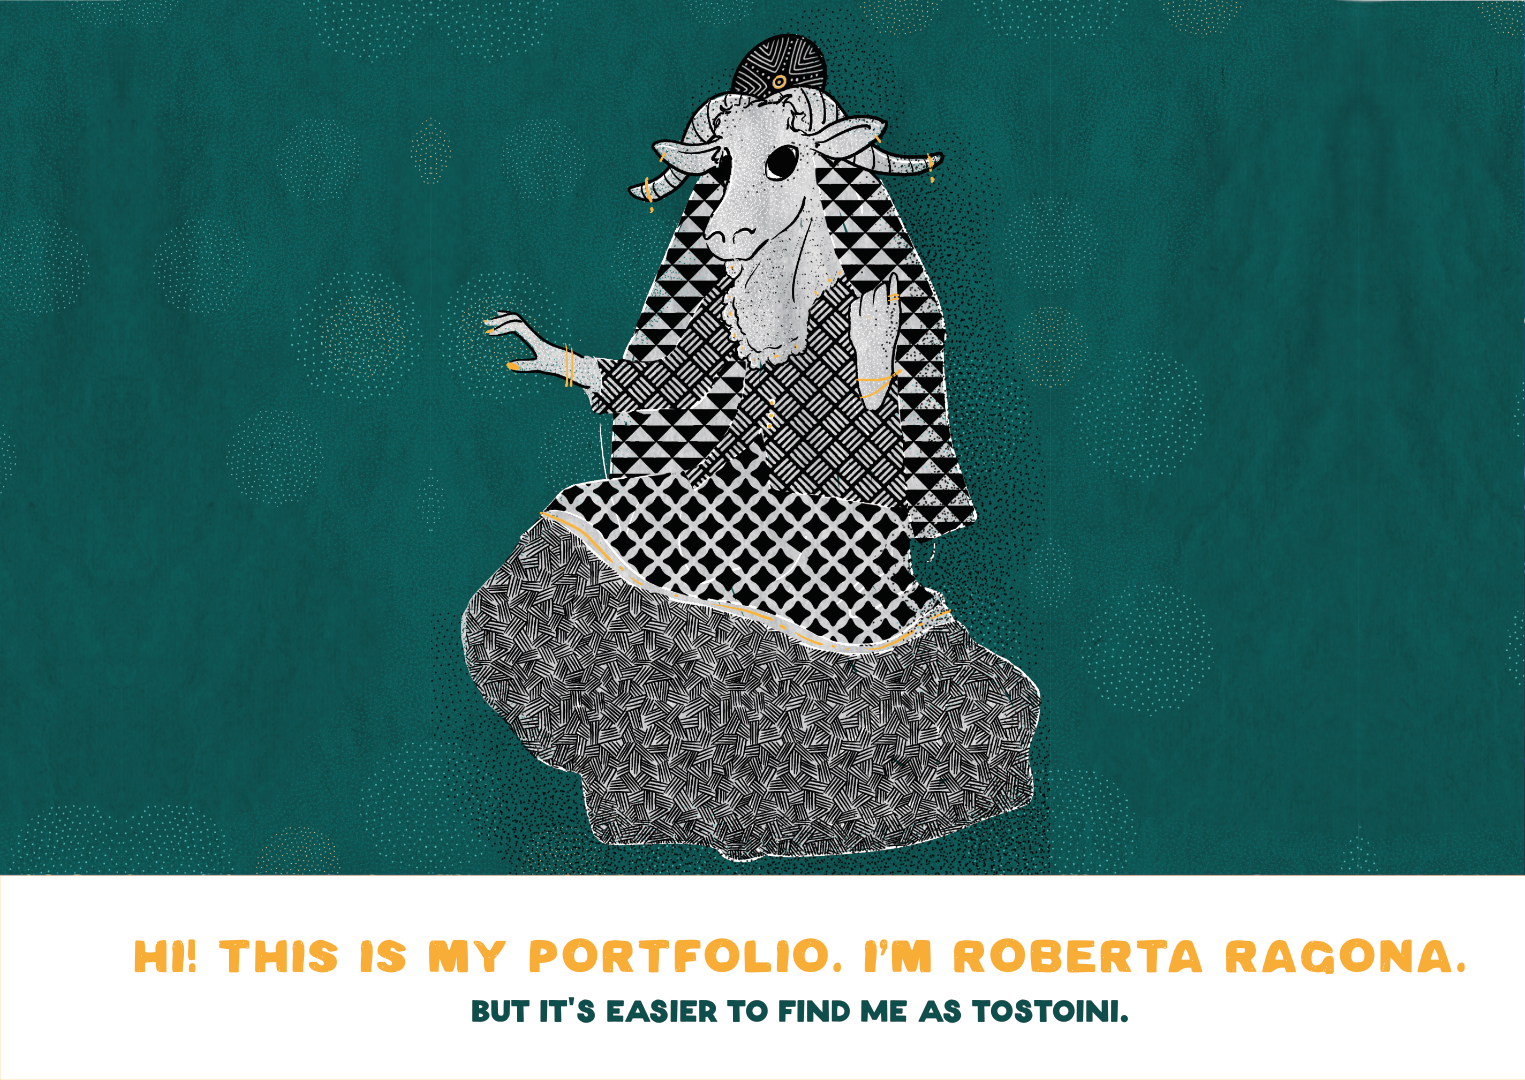 portfolio cover with an illustration of a folklore creature with the head of a bison on a human body dressed in a sardinian traditional outfit, on green/blue background and the caption "hi! this is my portfolio. I'm Roberta Ragona, but it's easier to find me as tostoini,"